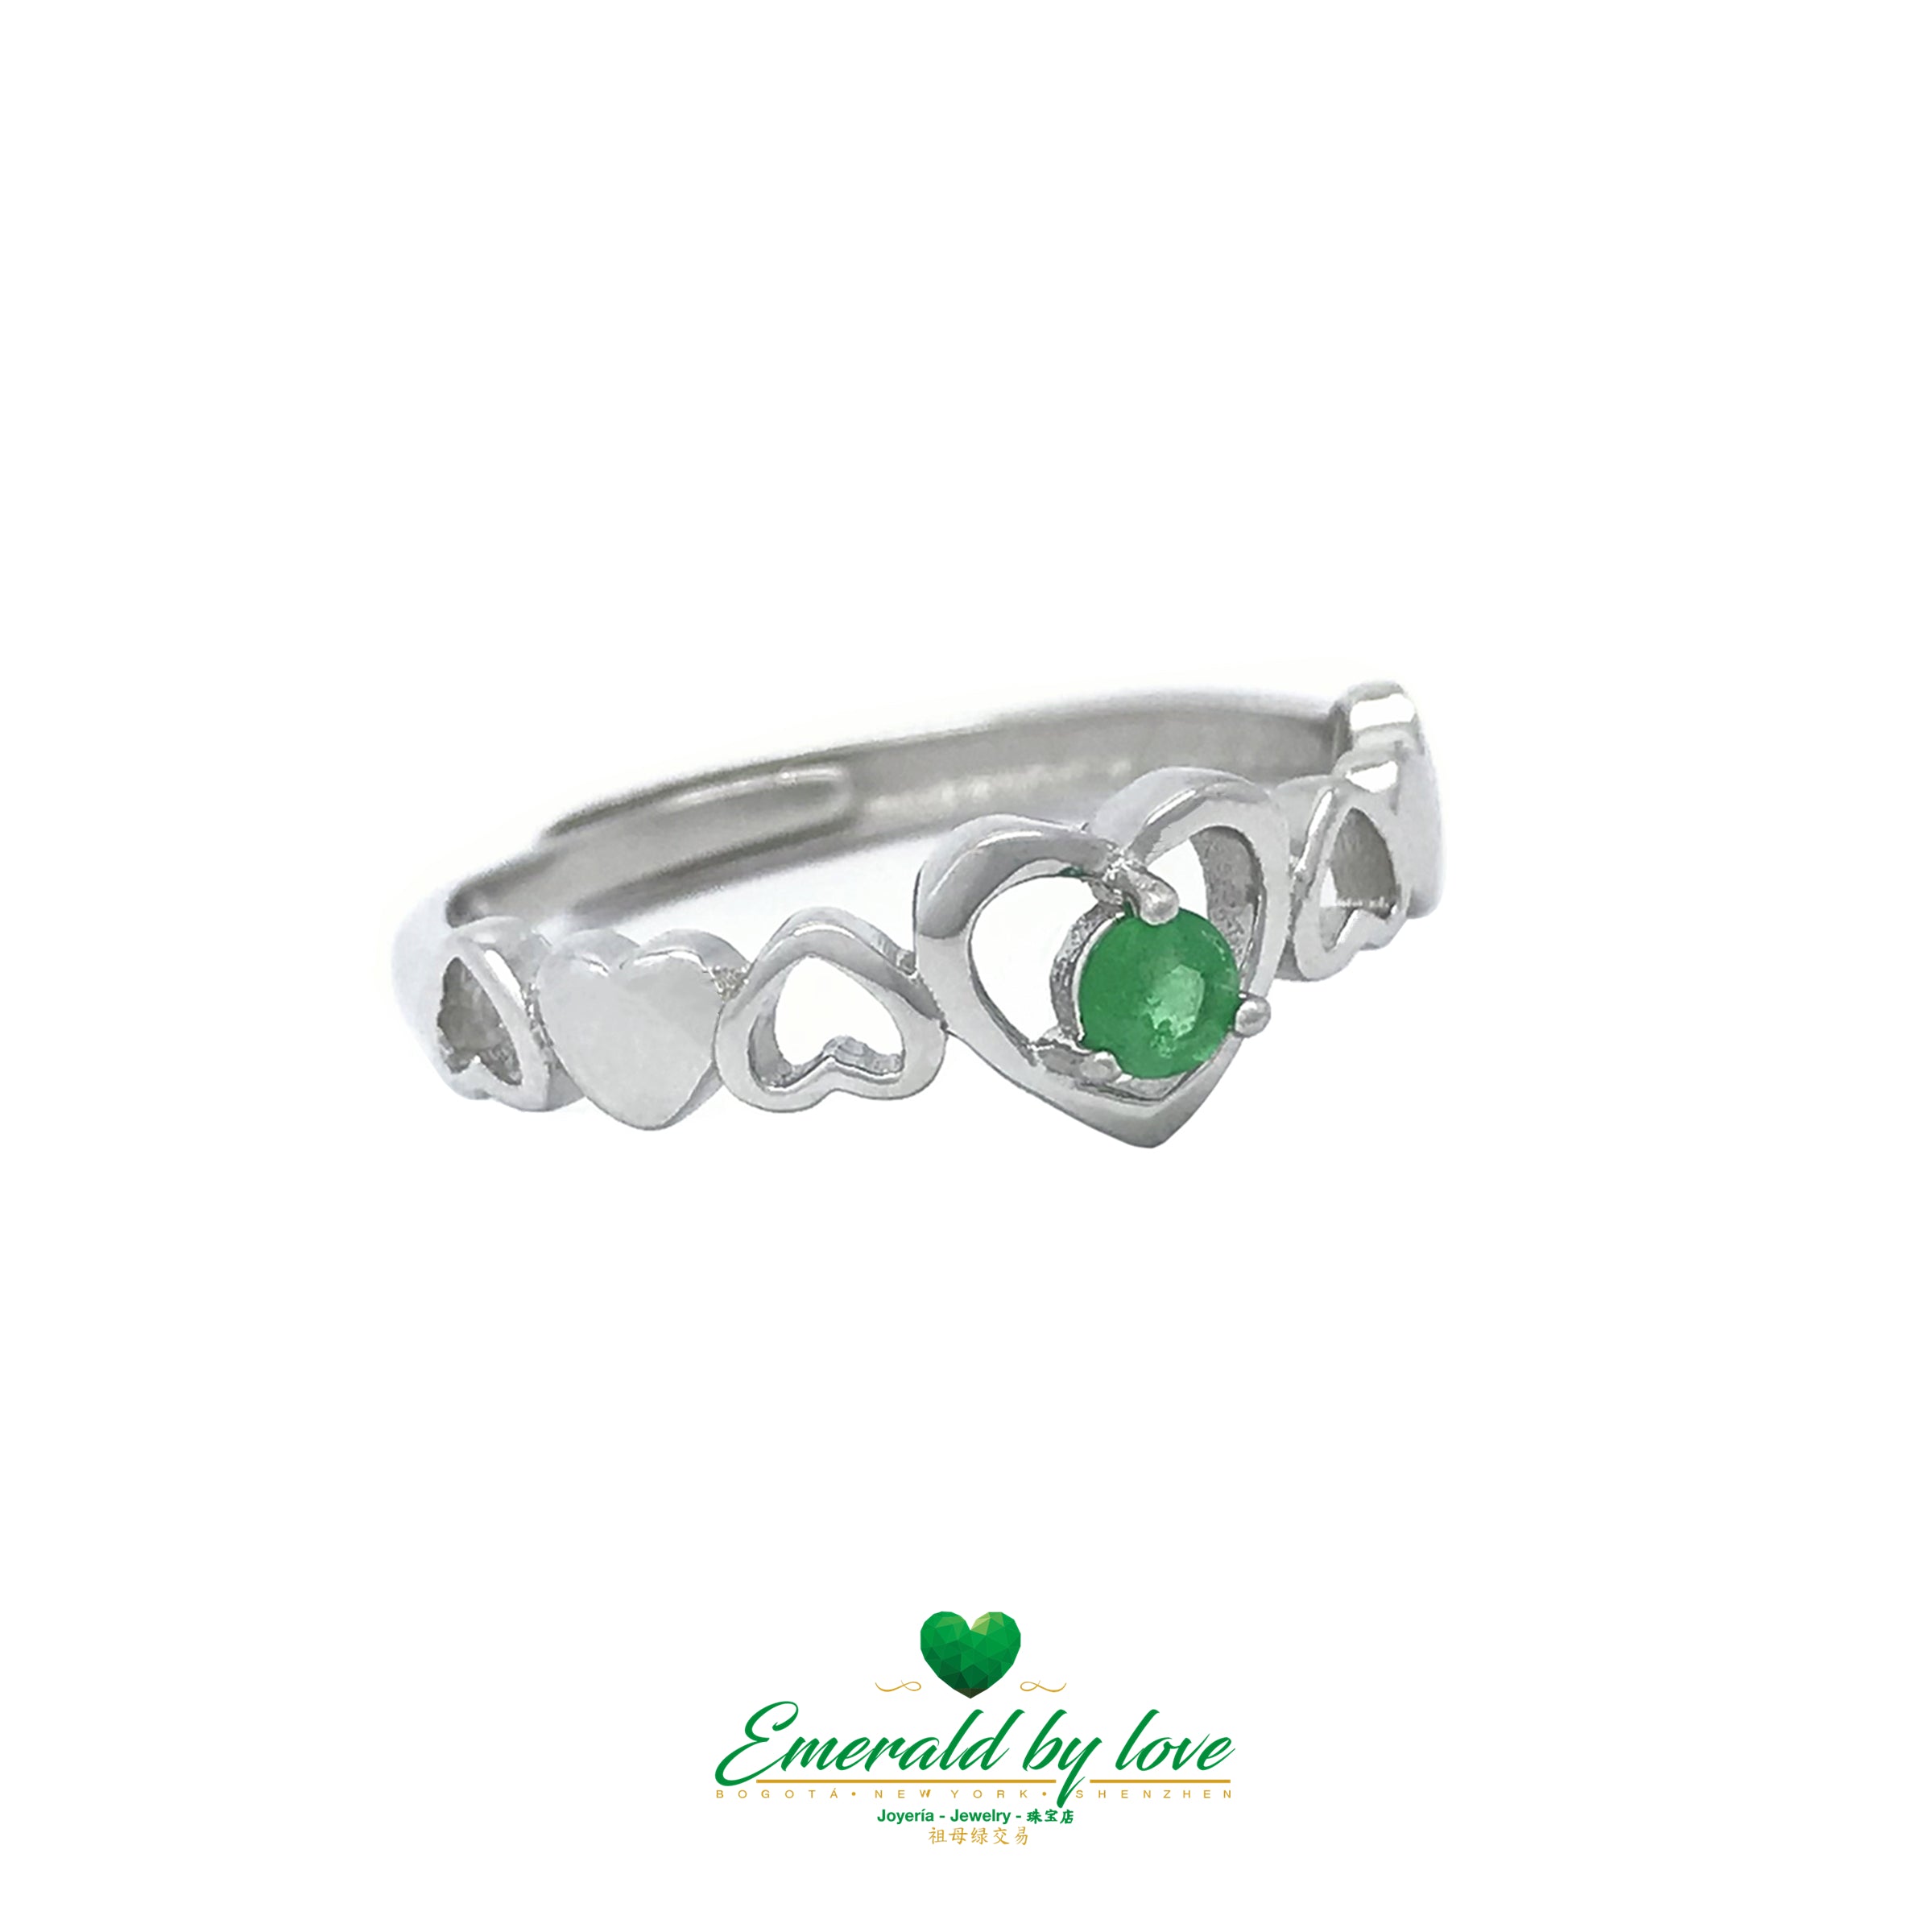 Silver Heart Motif Ring with Round Central Emerald: Symbol of Endless Love